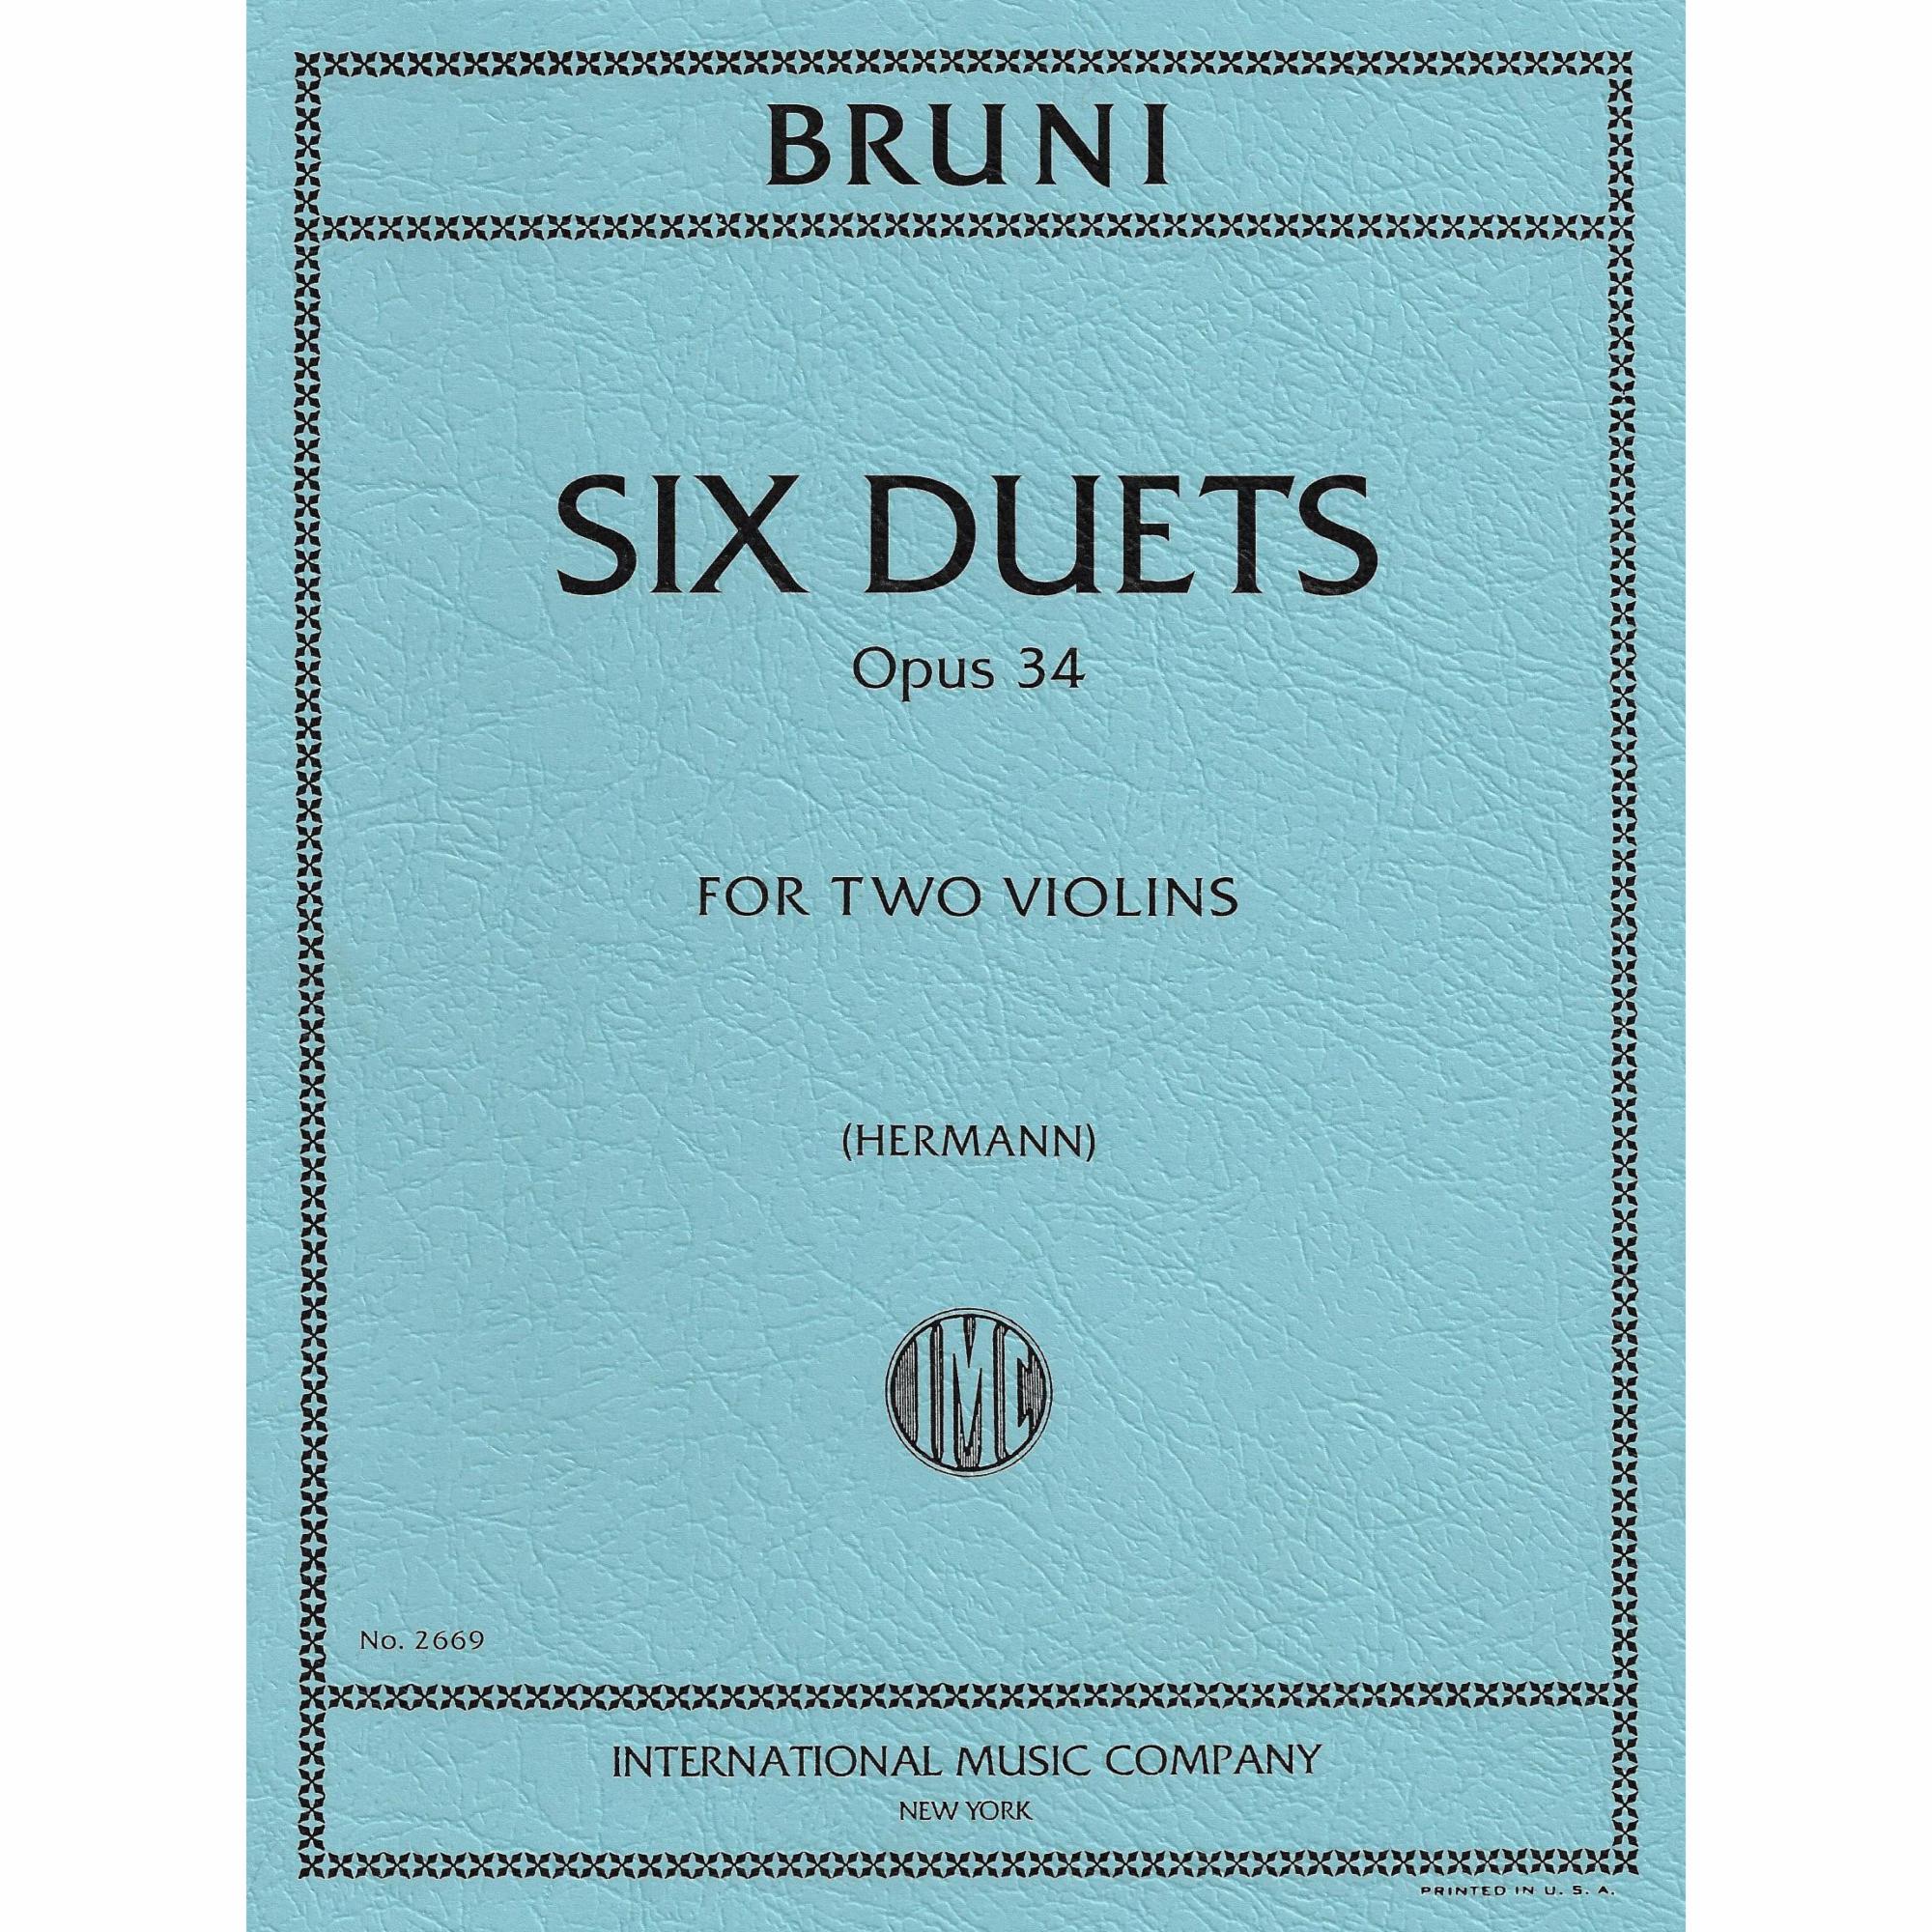 Bruni -- Six Duets, Op. 34 for Two Violins